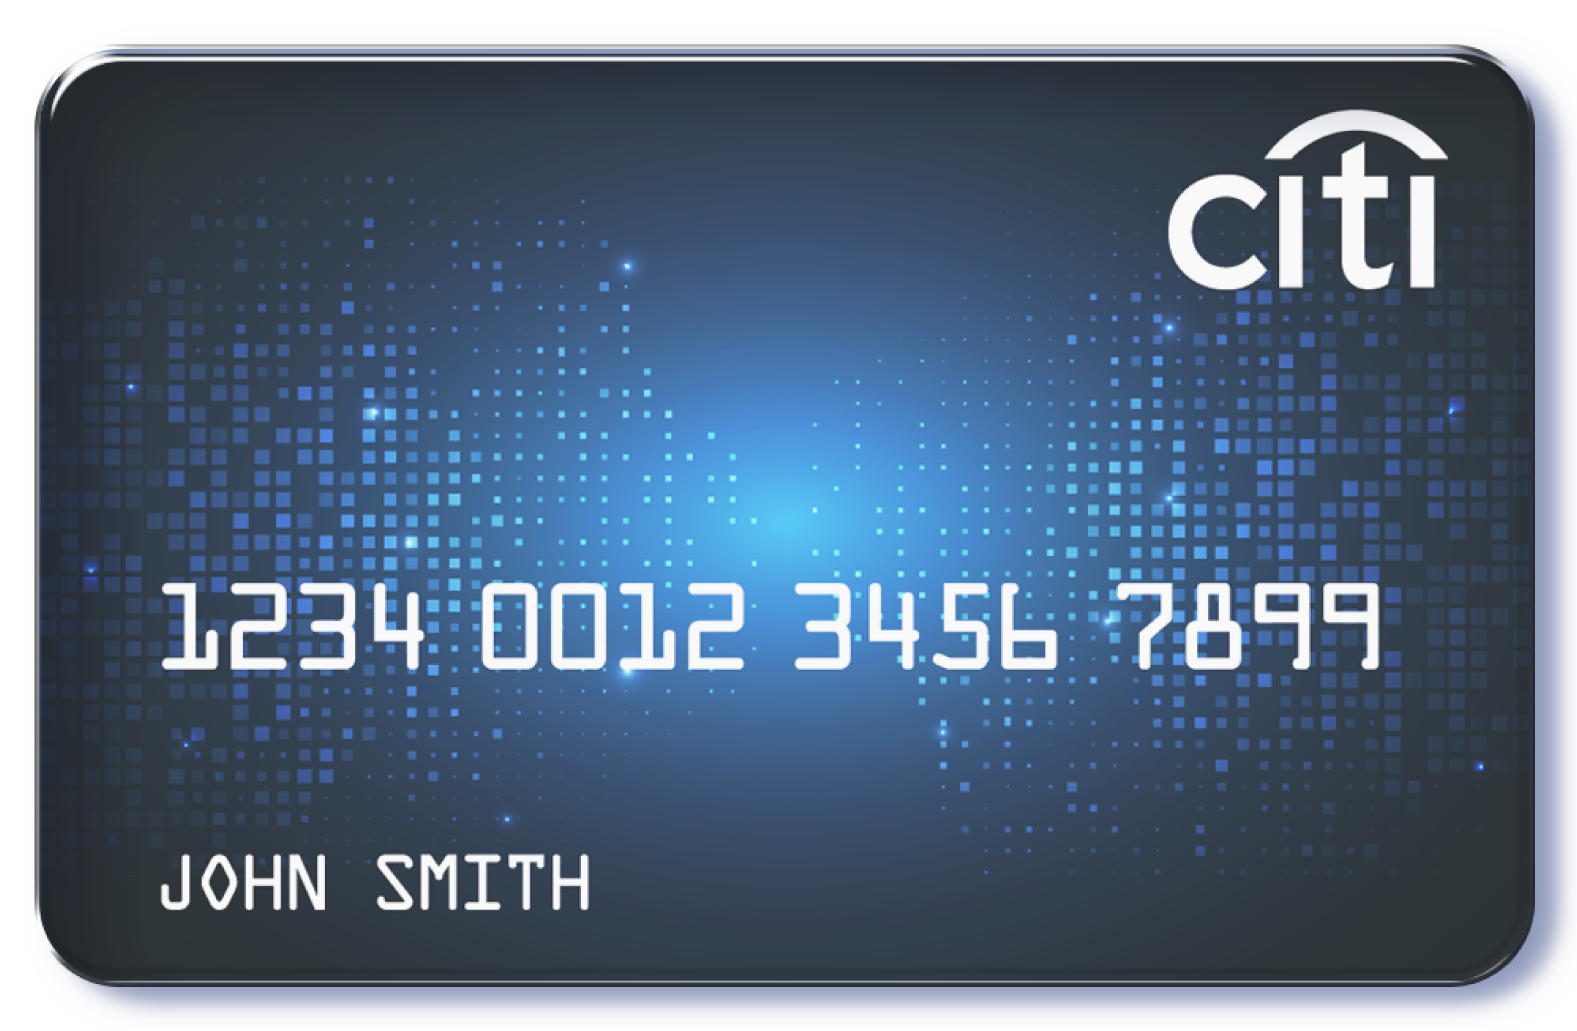 citi commercial travel card login